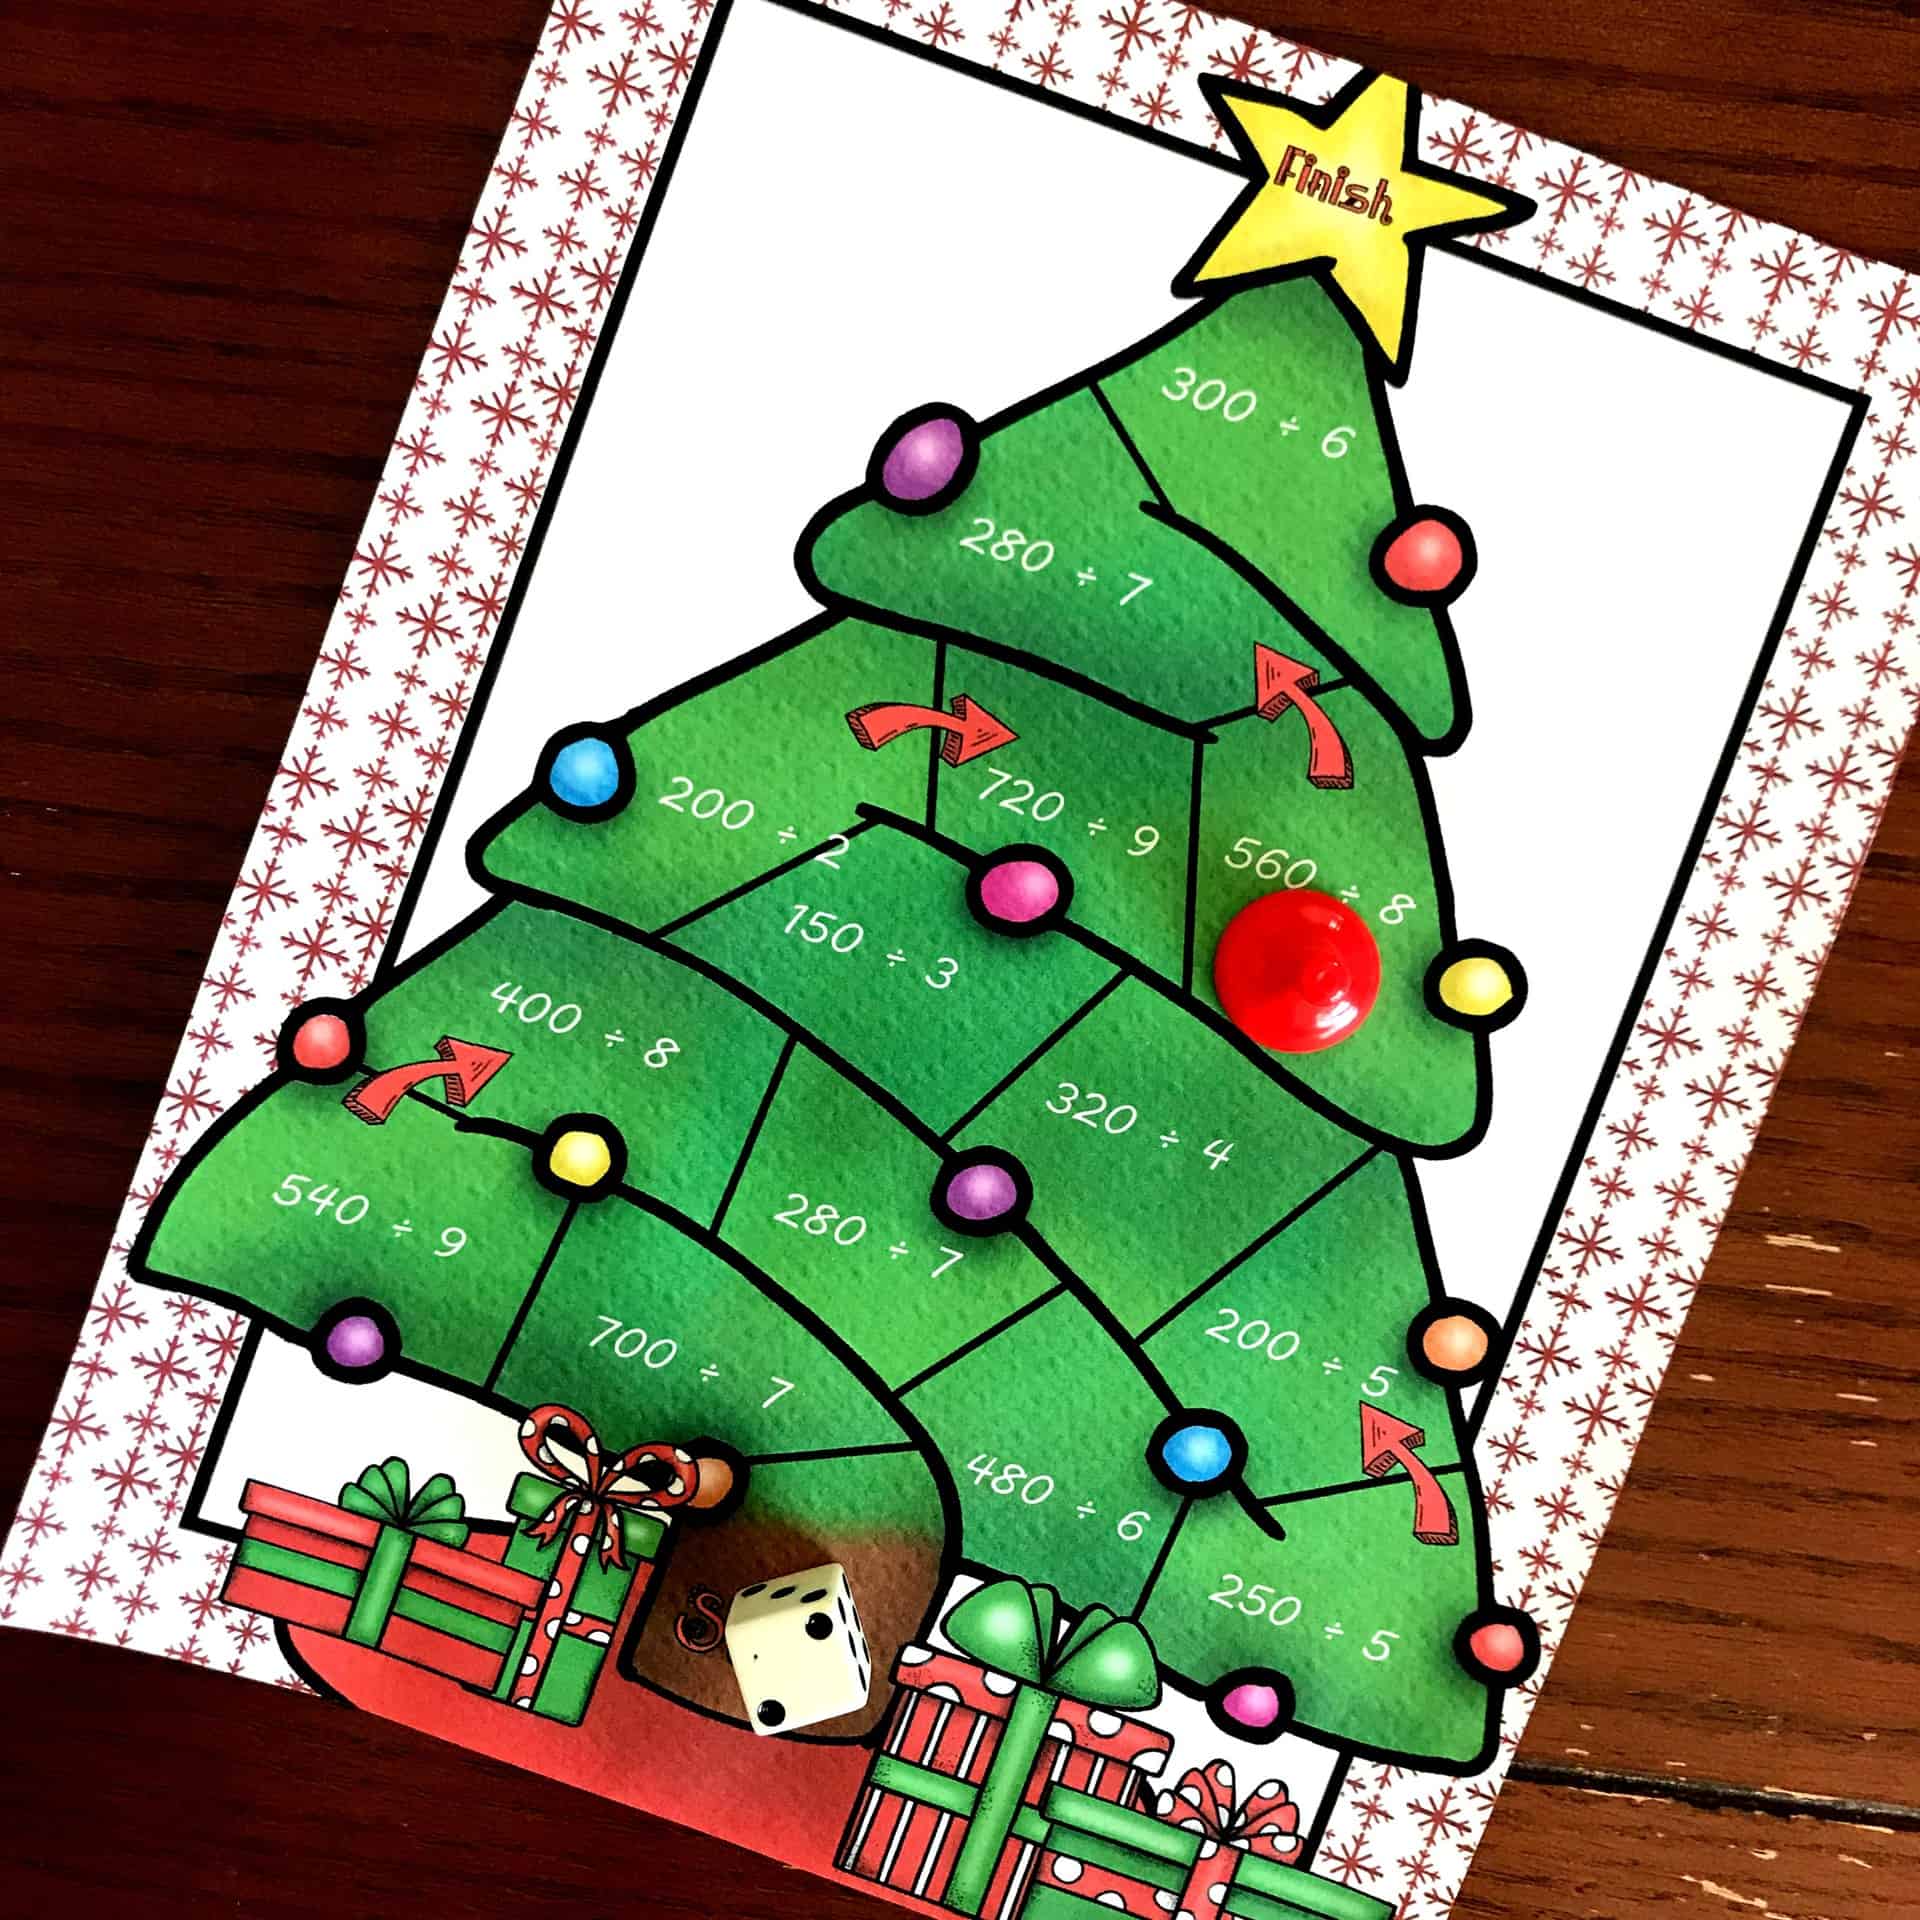 FREE No-Prep Christmas Game For Dividing Multiples of 10 by a Single Digit